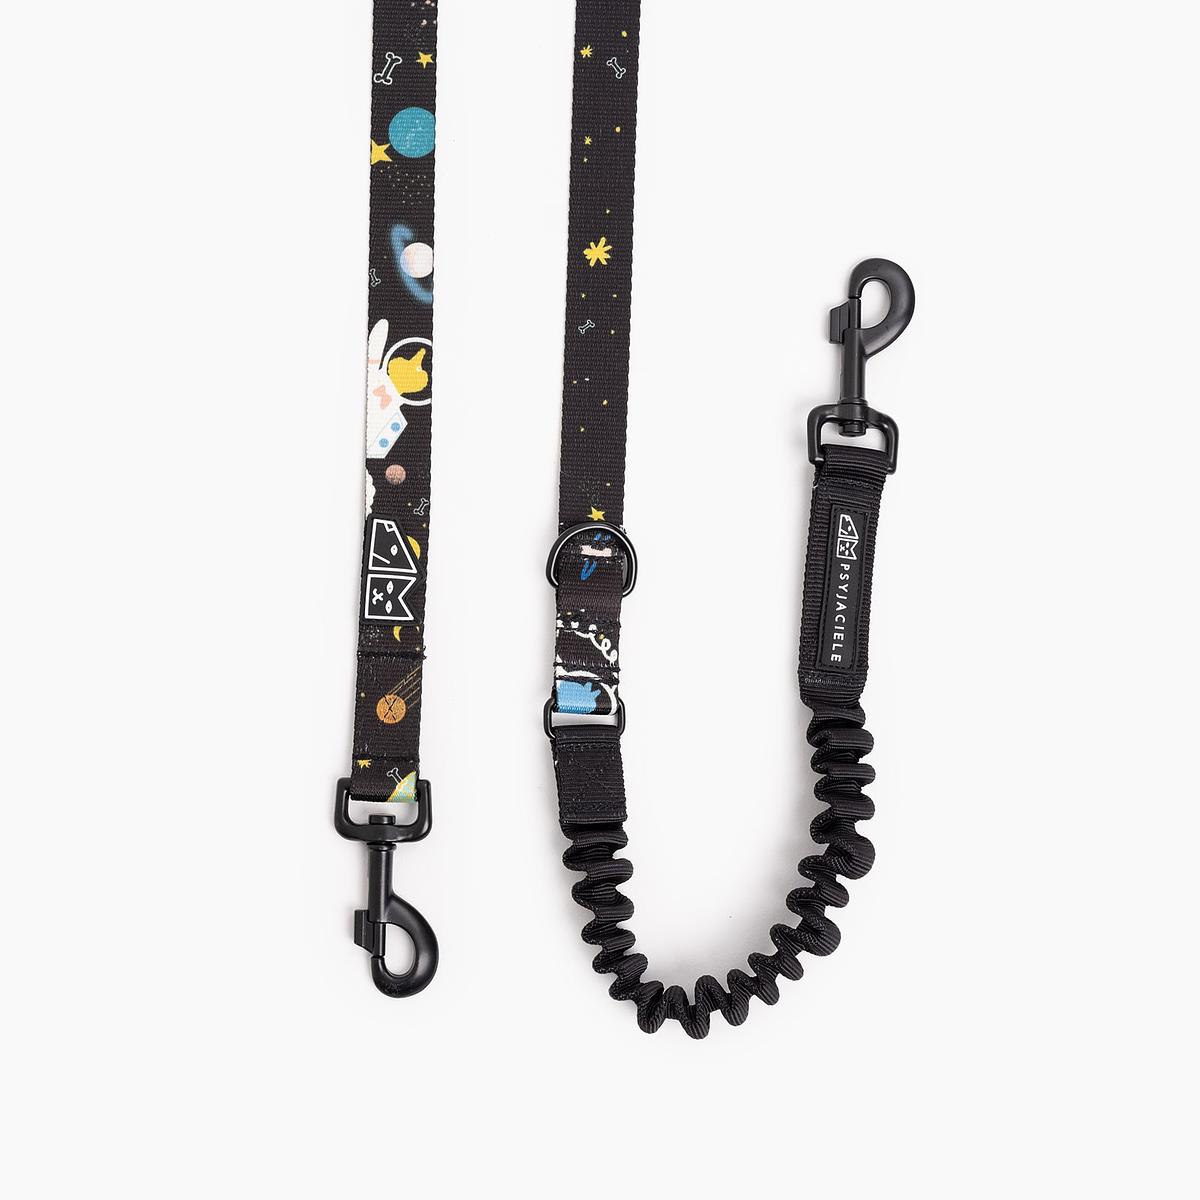 "I need space" leash with a shock absorber